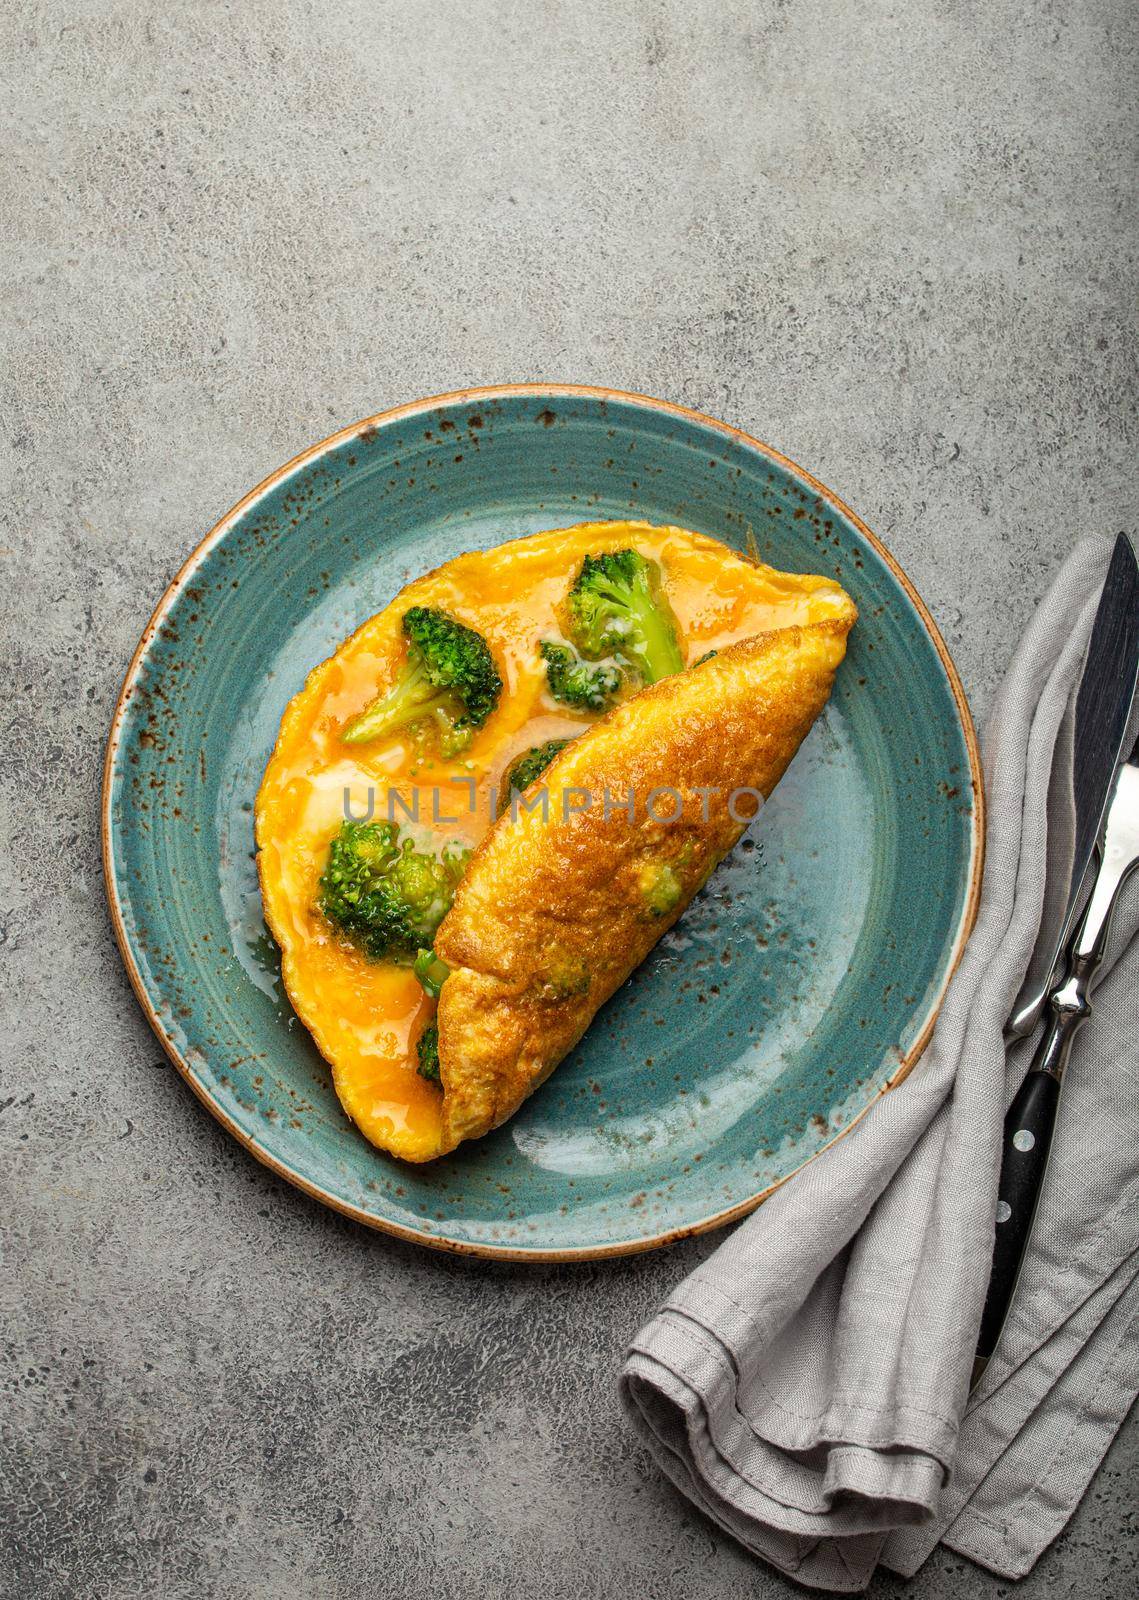 Healthy omelette with broccoli on plate top view by its_al_dente